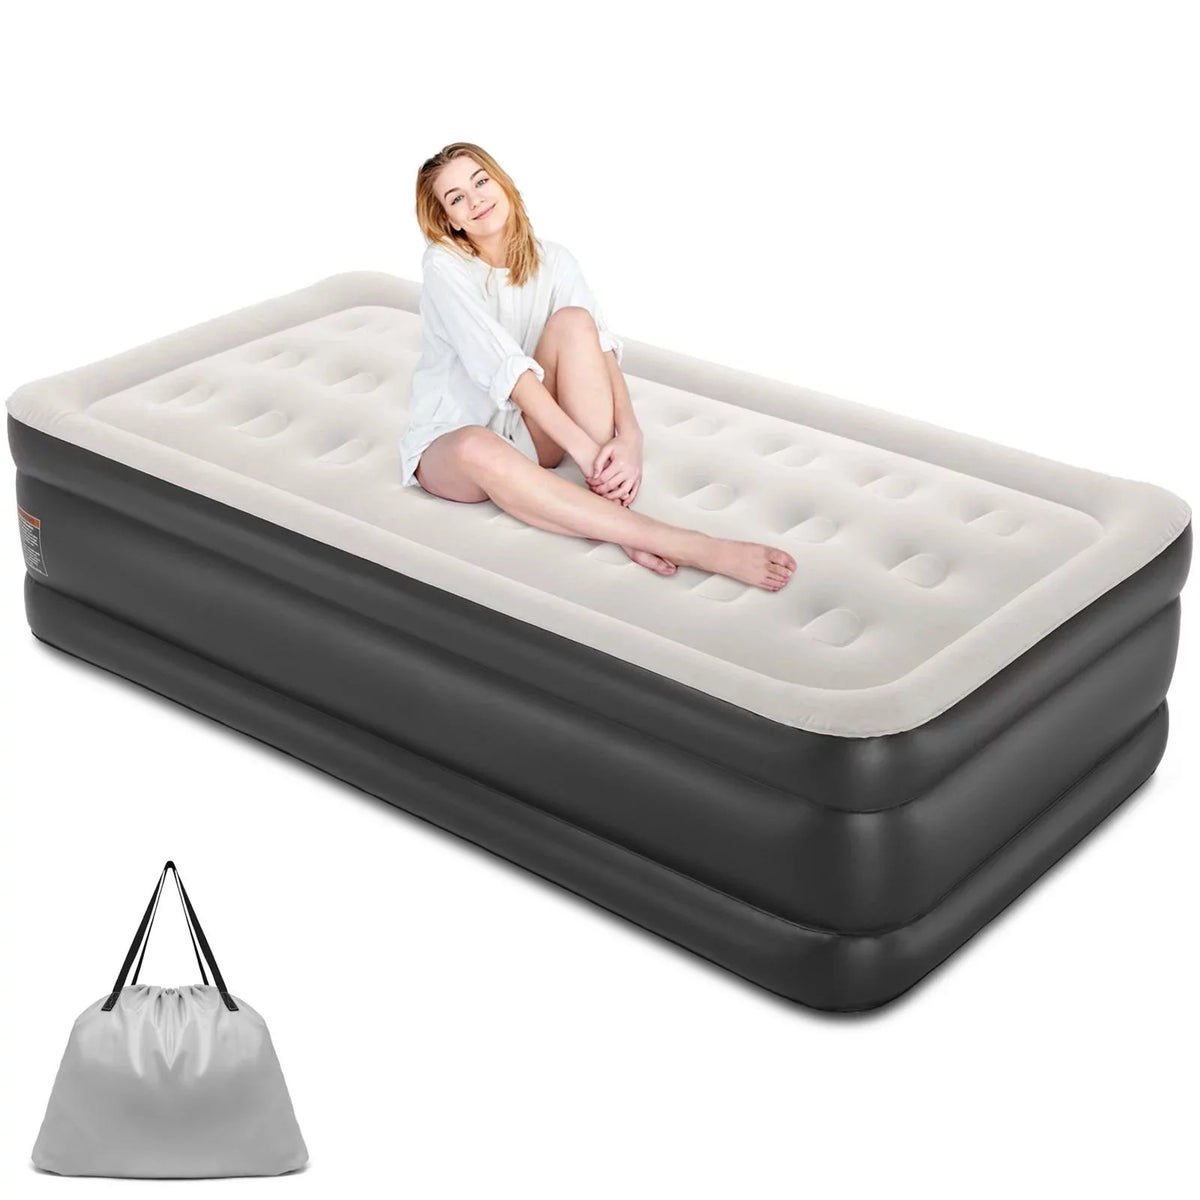 18 inch Twin Size Air Mattress with Built-in-Pump, Black